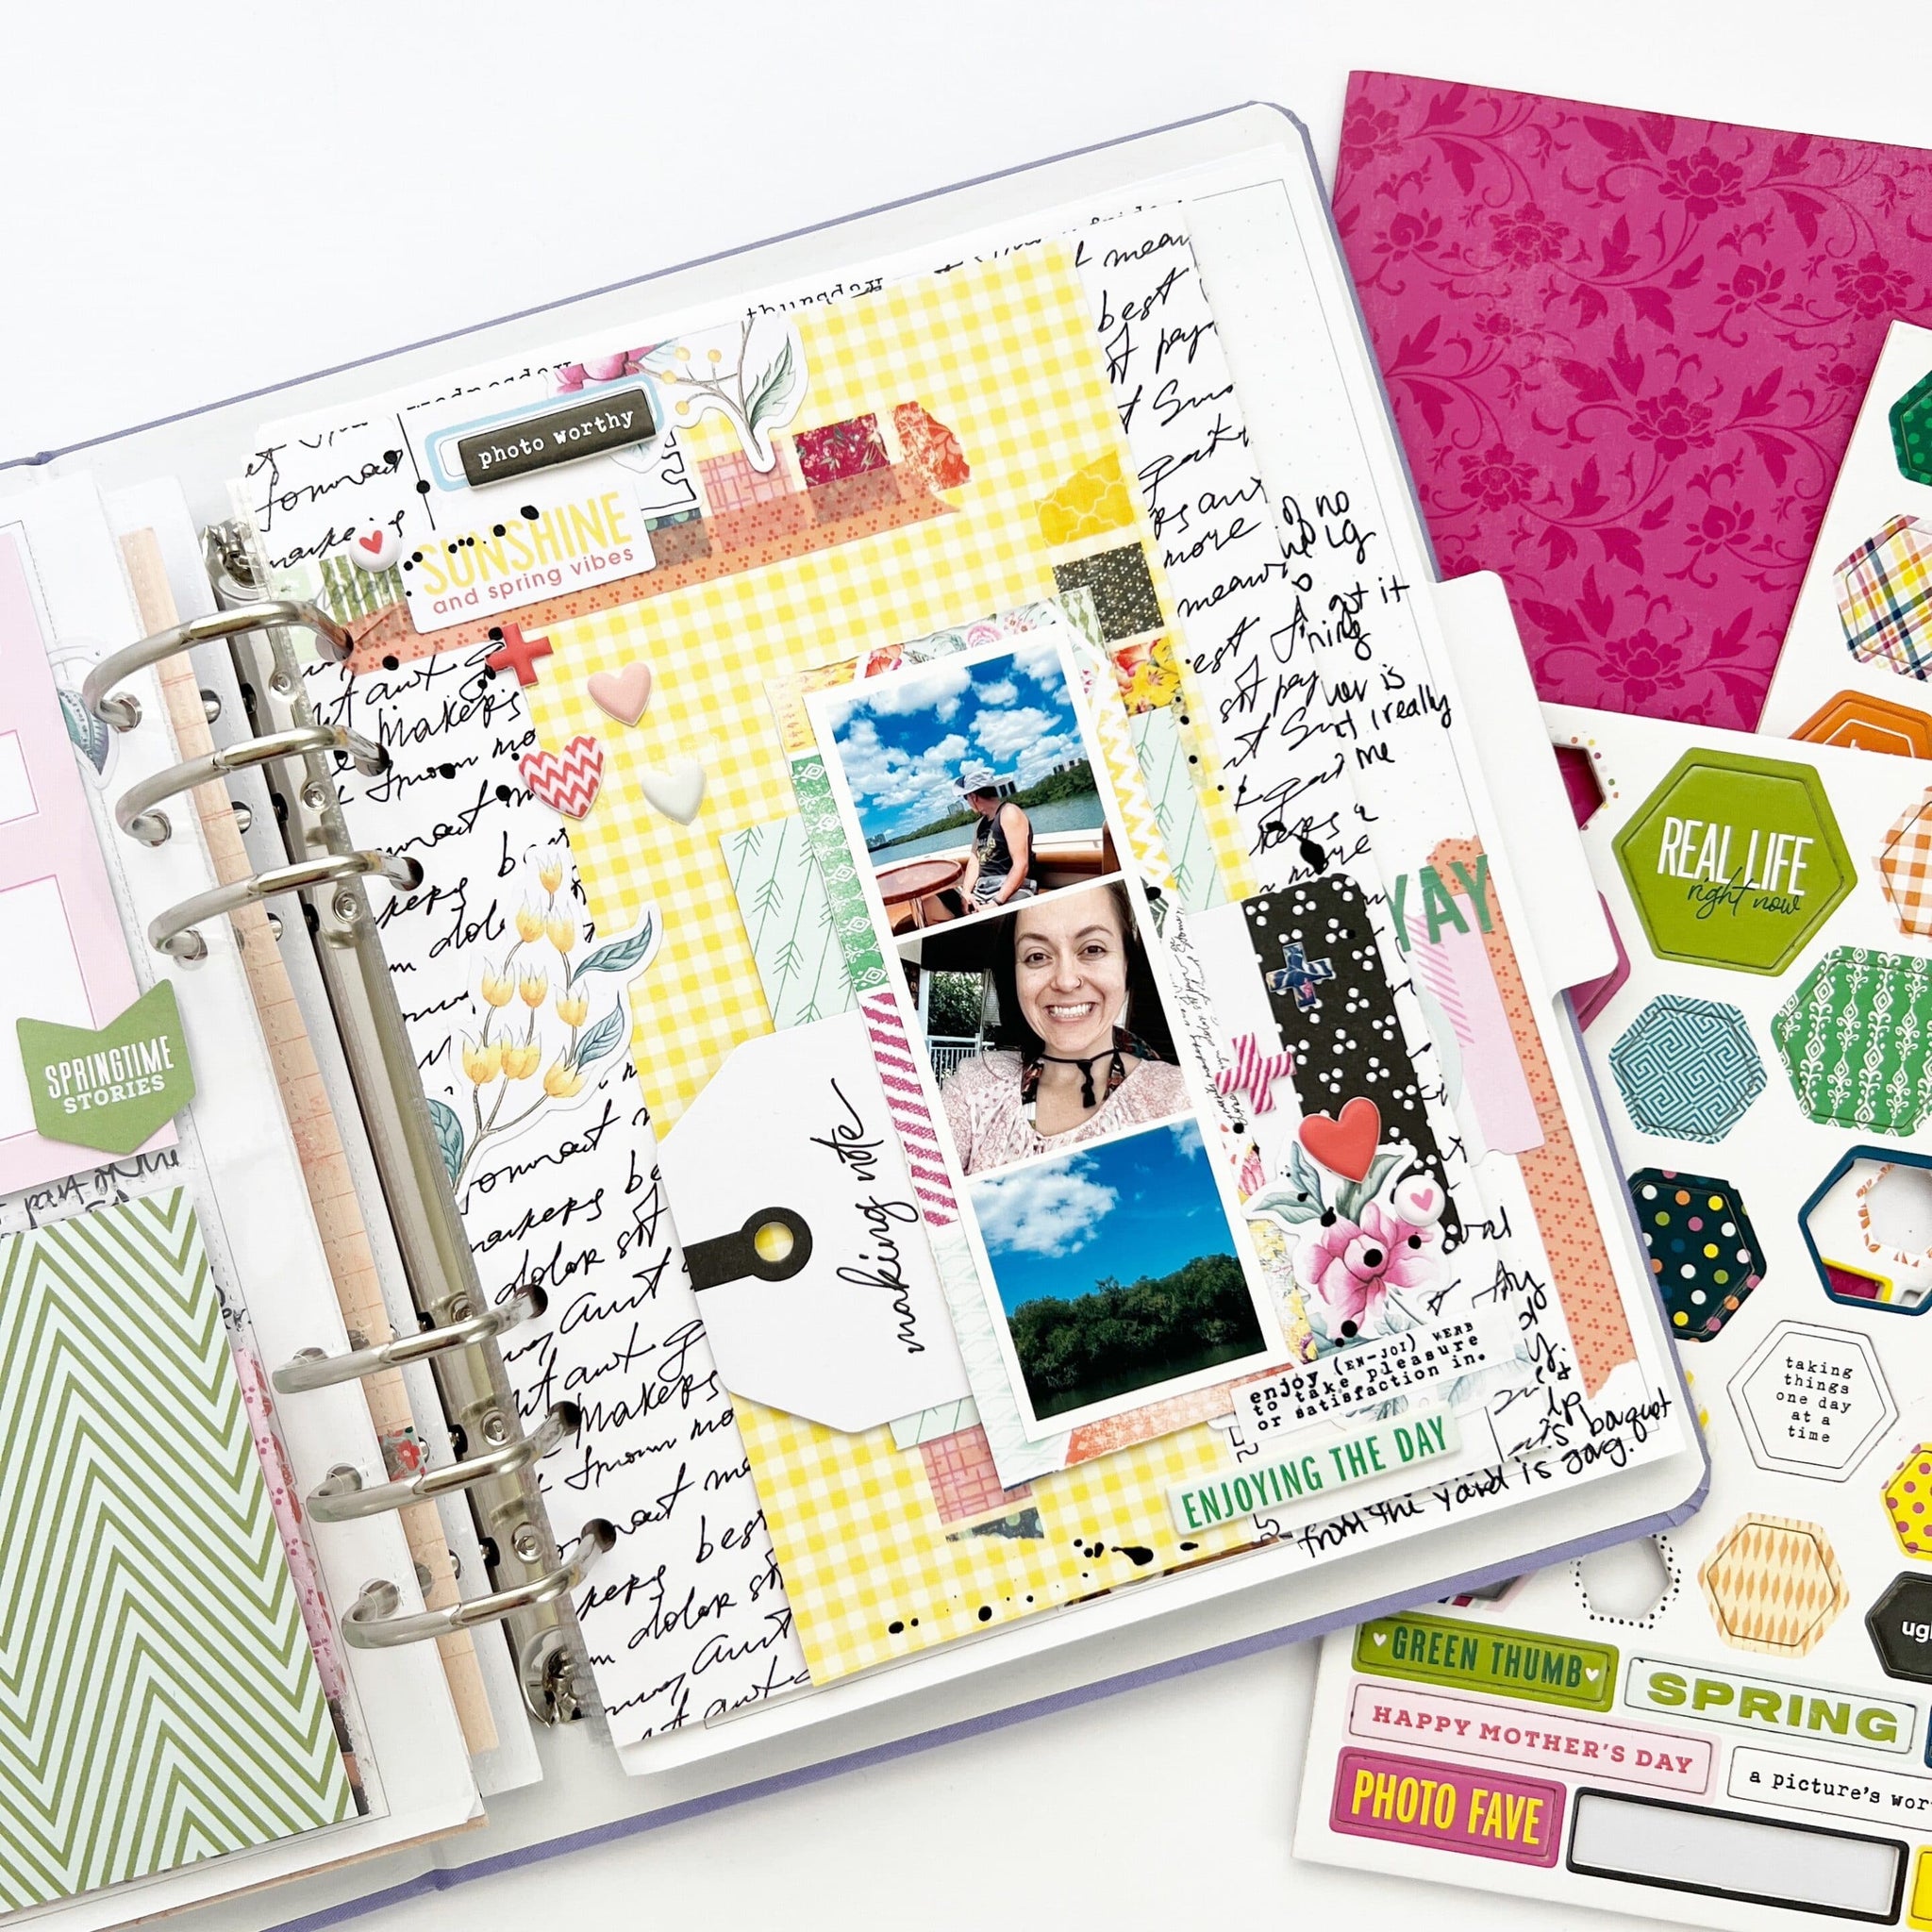 Lesson 6: Adding Extra Inserts to You Memory Planner